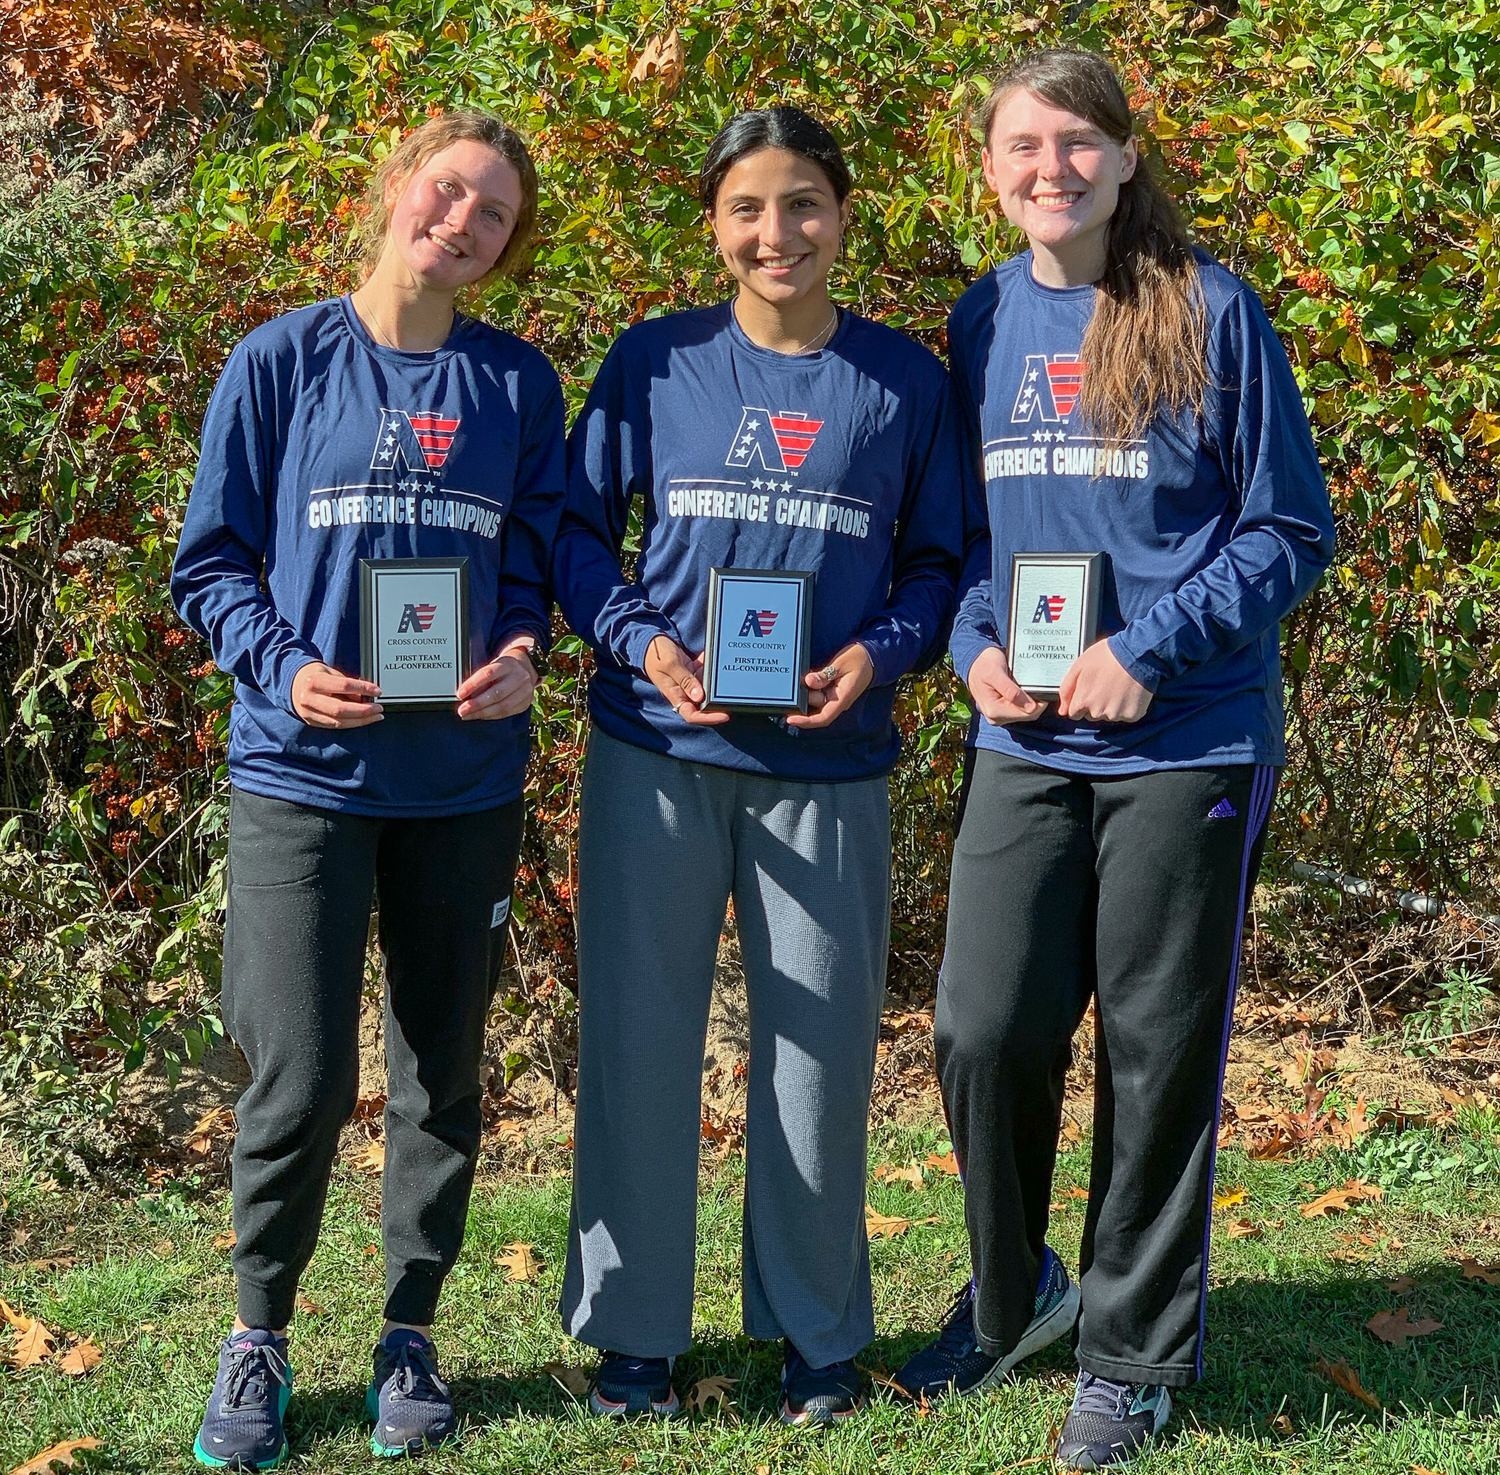 Three female cross country runners holding individual trophies